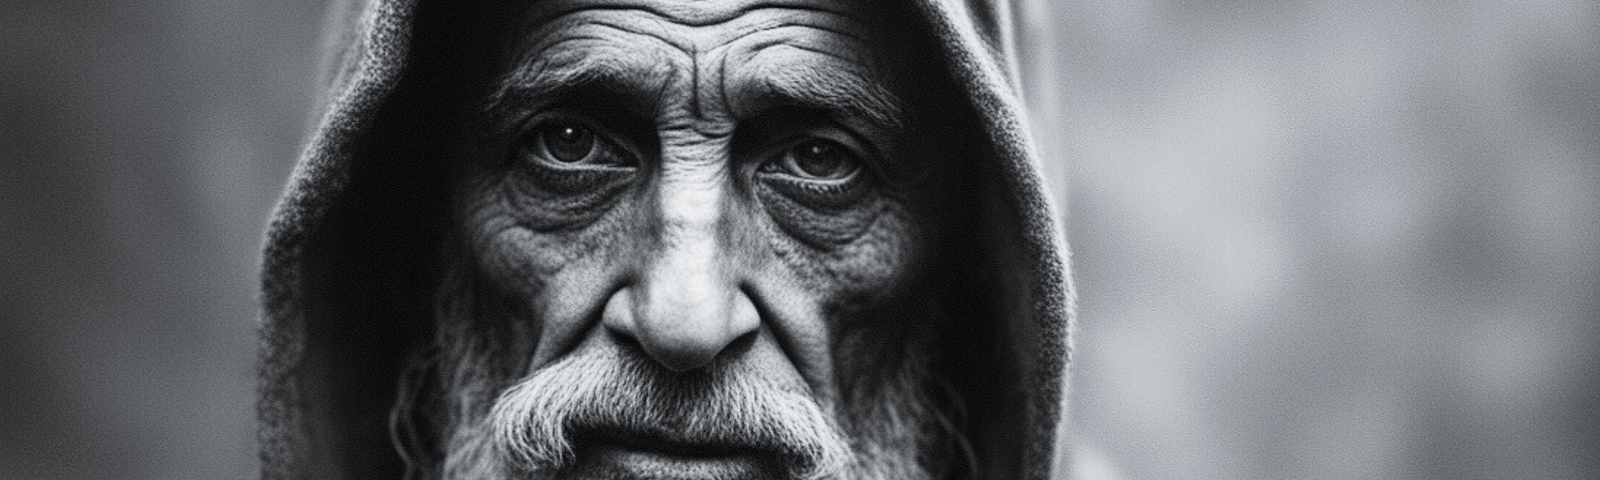 A homeless man with sad eyes in black and white.